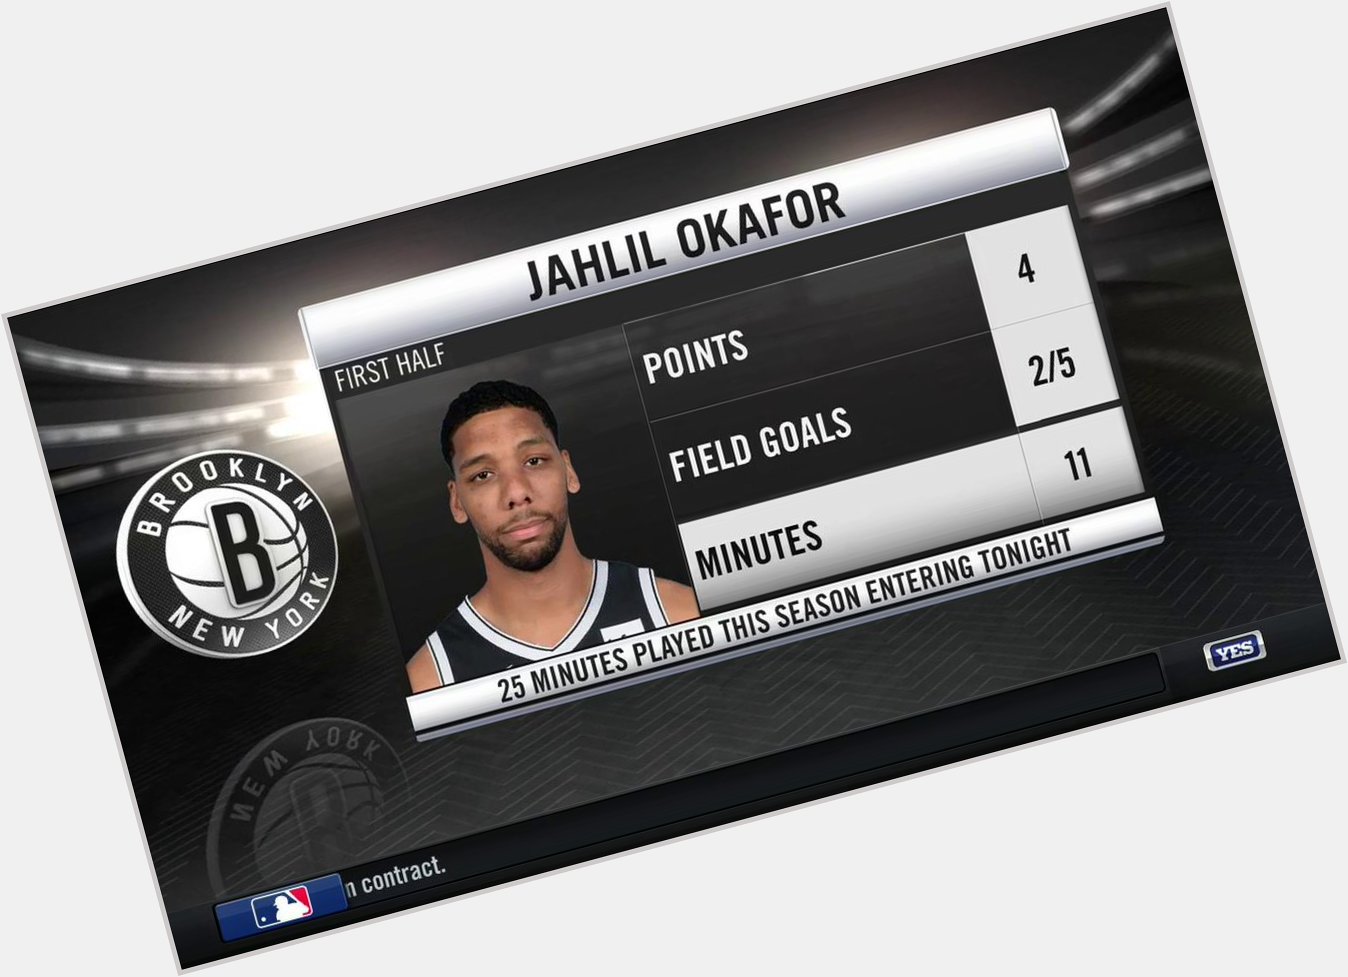 Happy birthday to Jahlil Okafor, who just made his debut! 